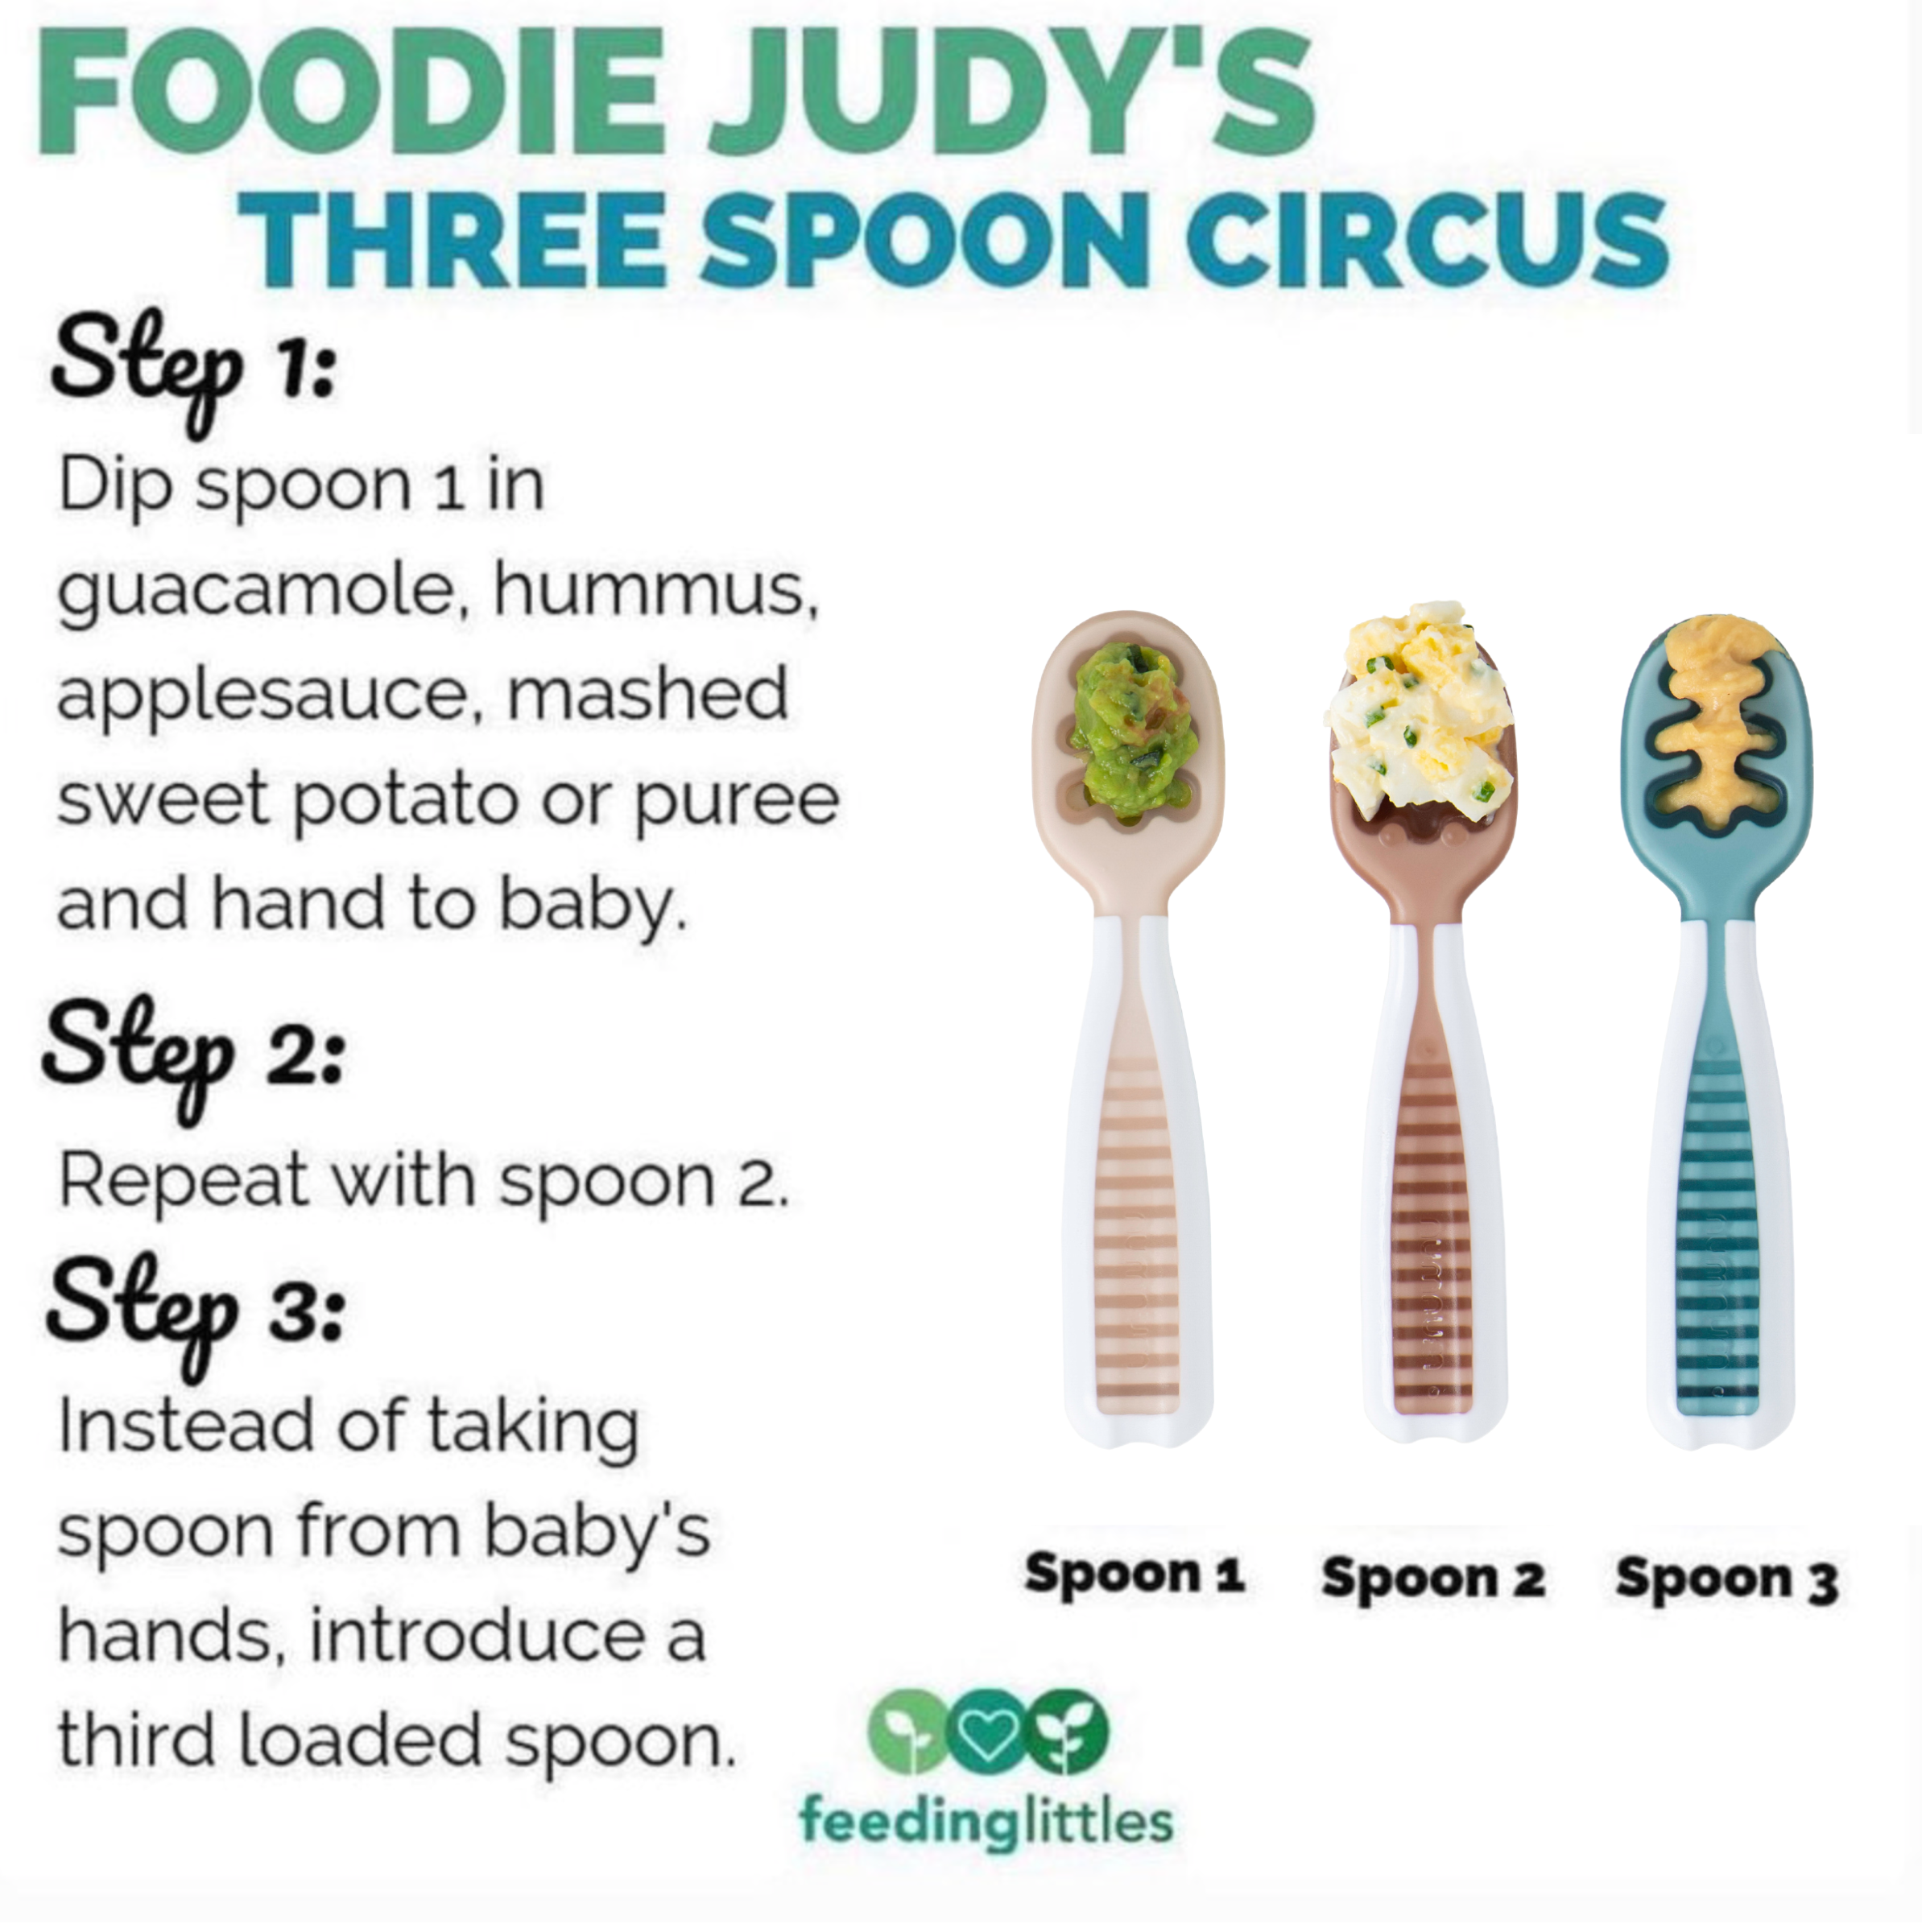 Hands vs Spoons: When to Introduce a Spoon During Baby-Led Weaning